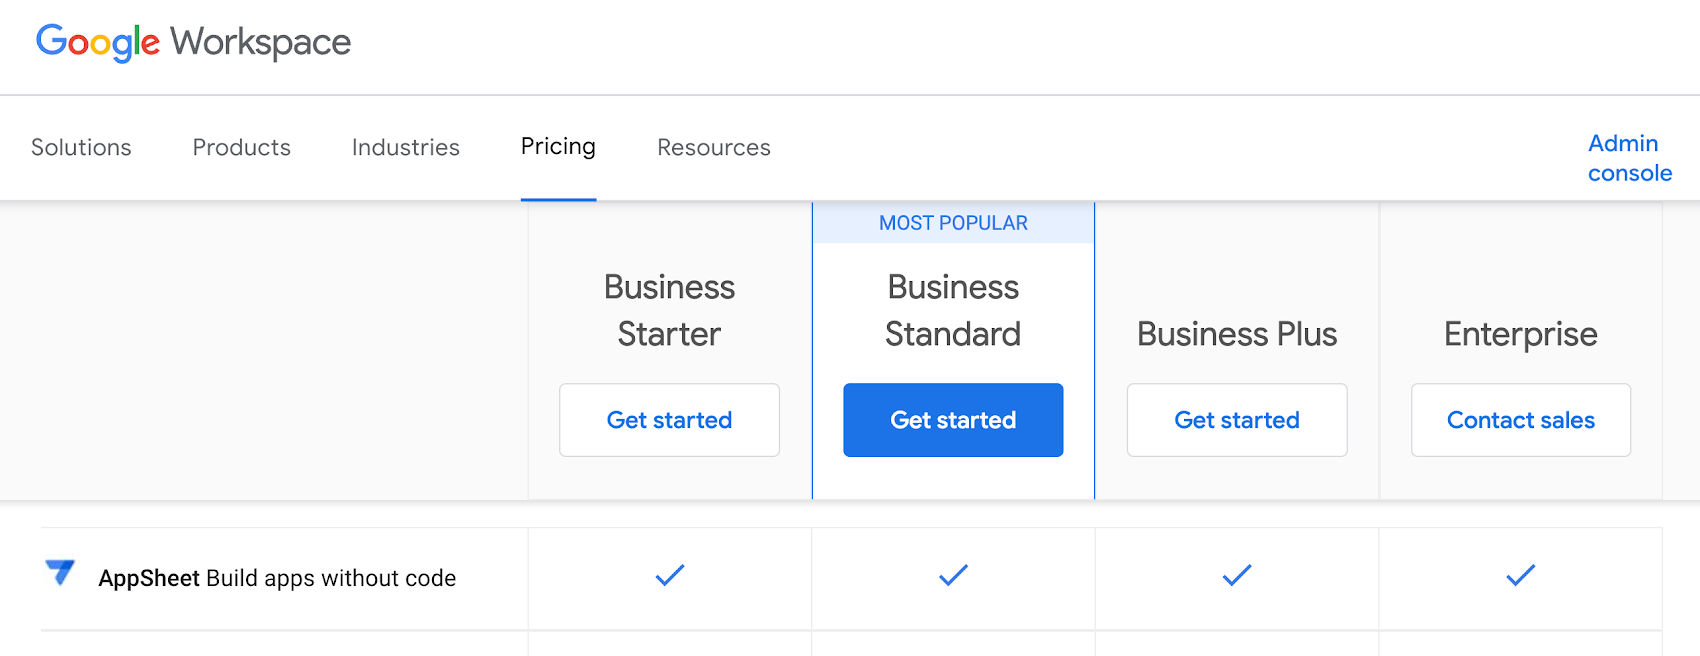 https://storage.googleapis.com/gweb-cloudblog-publish/images/02_Workspace_pricing_page_with_AppSheet_-_.max-1700x1700.png